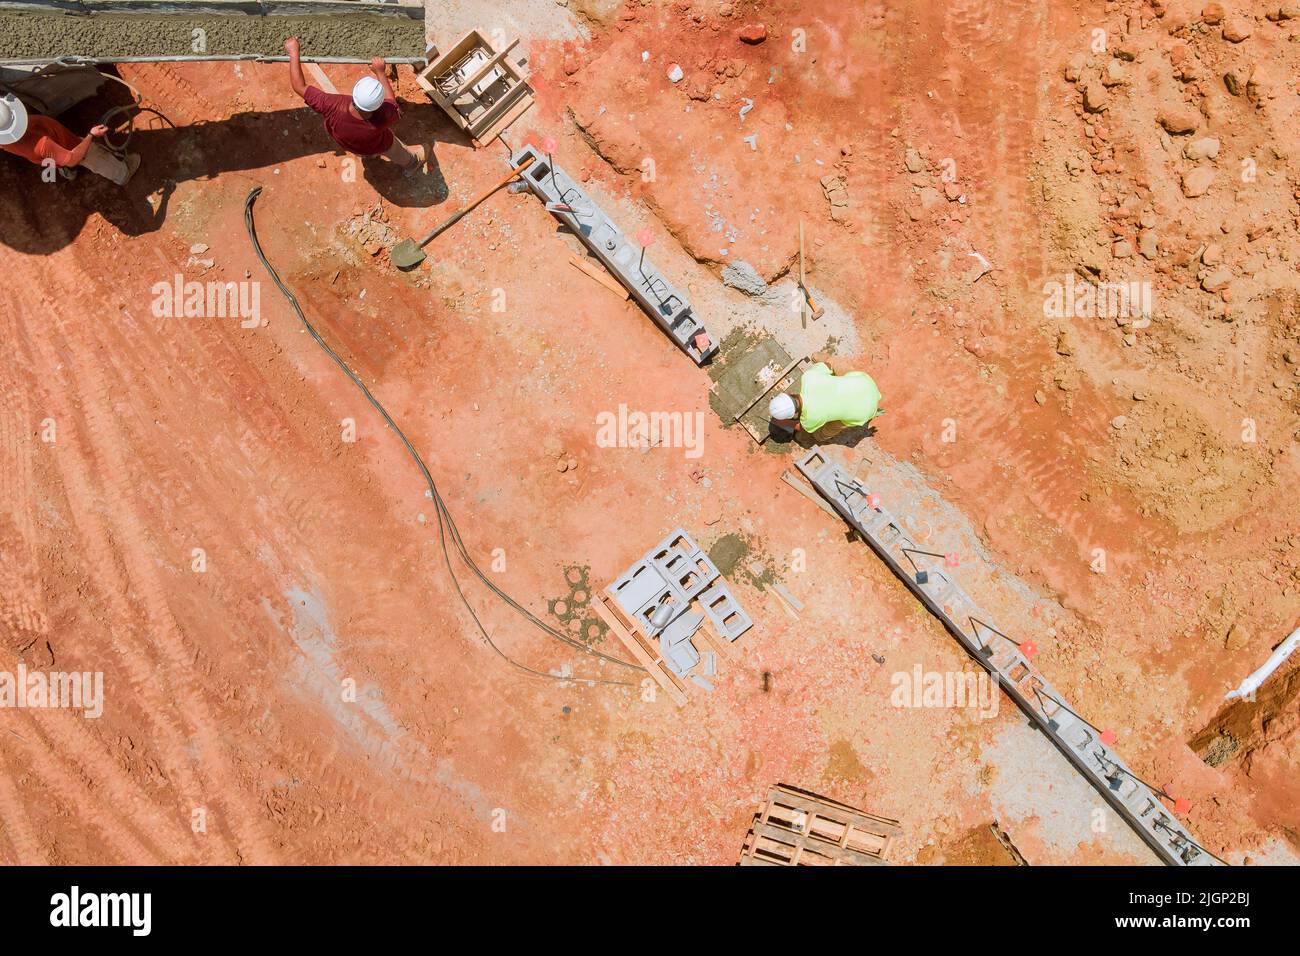 In an aerial view, workers pour concrete columns on a construction site Stock Photo